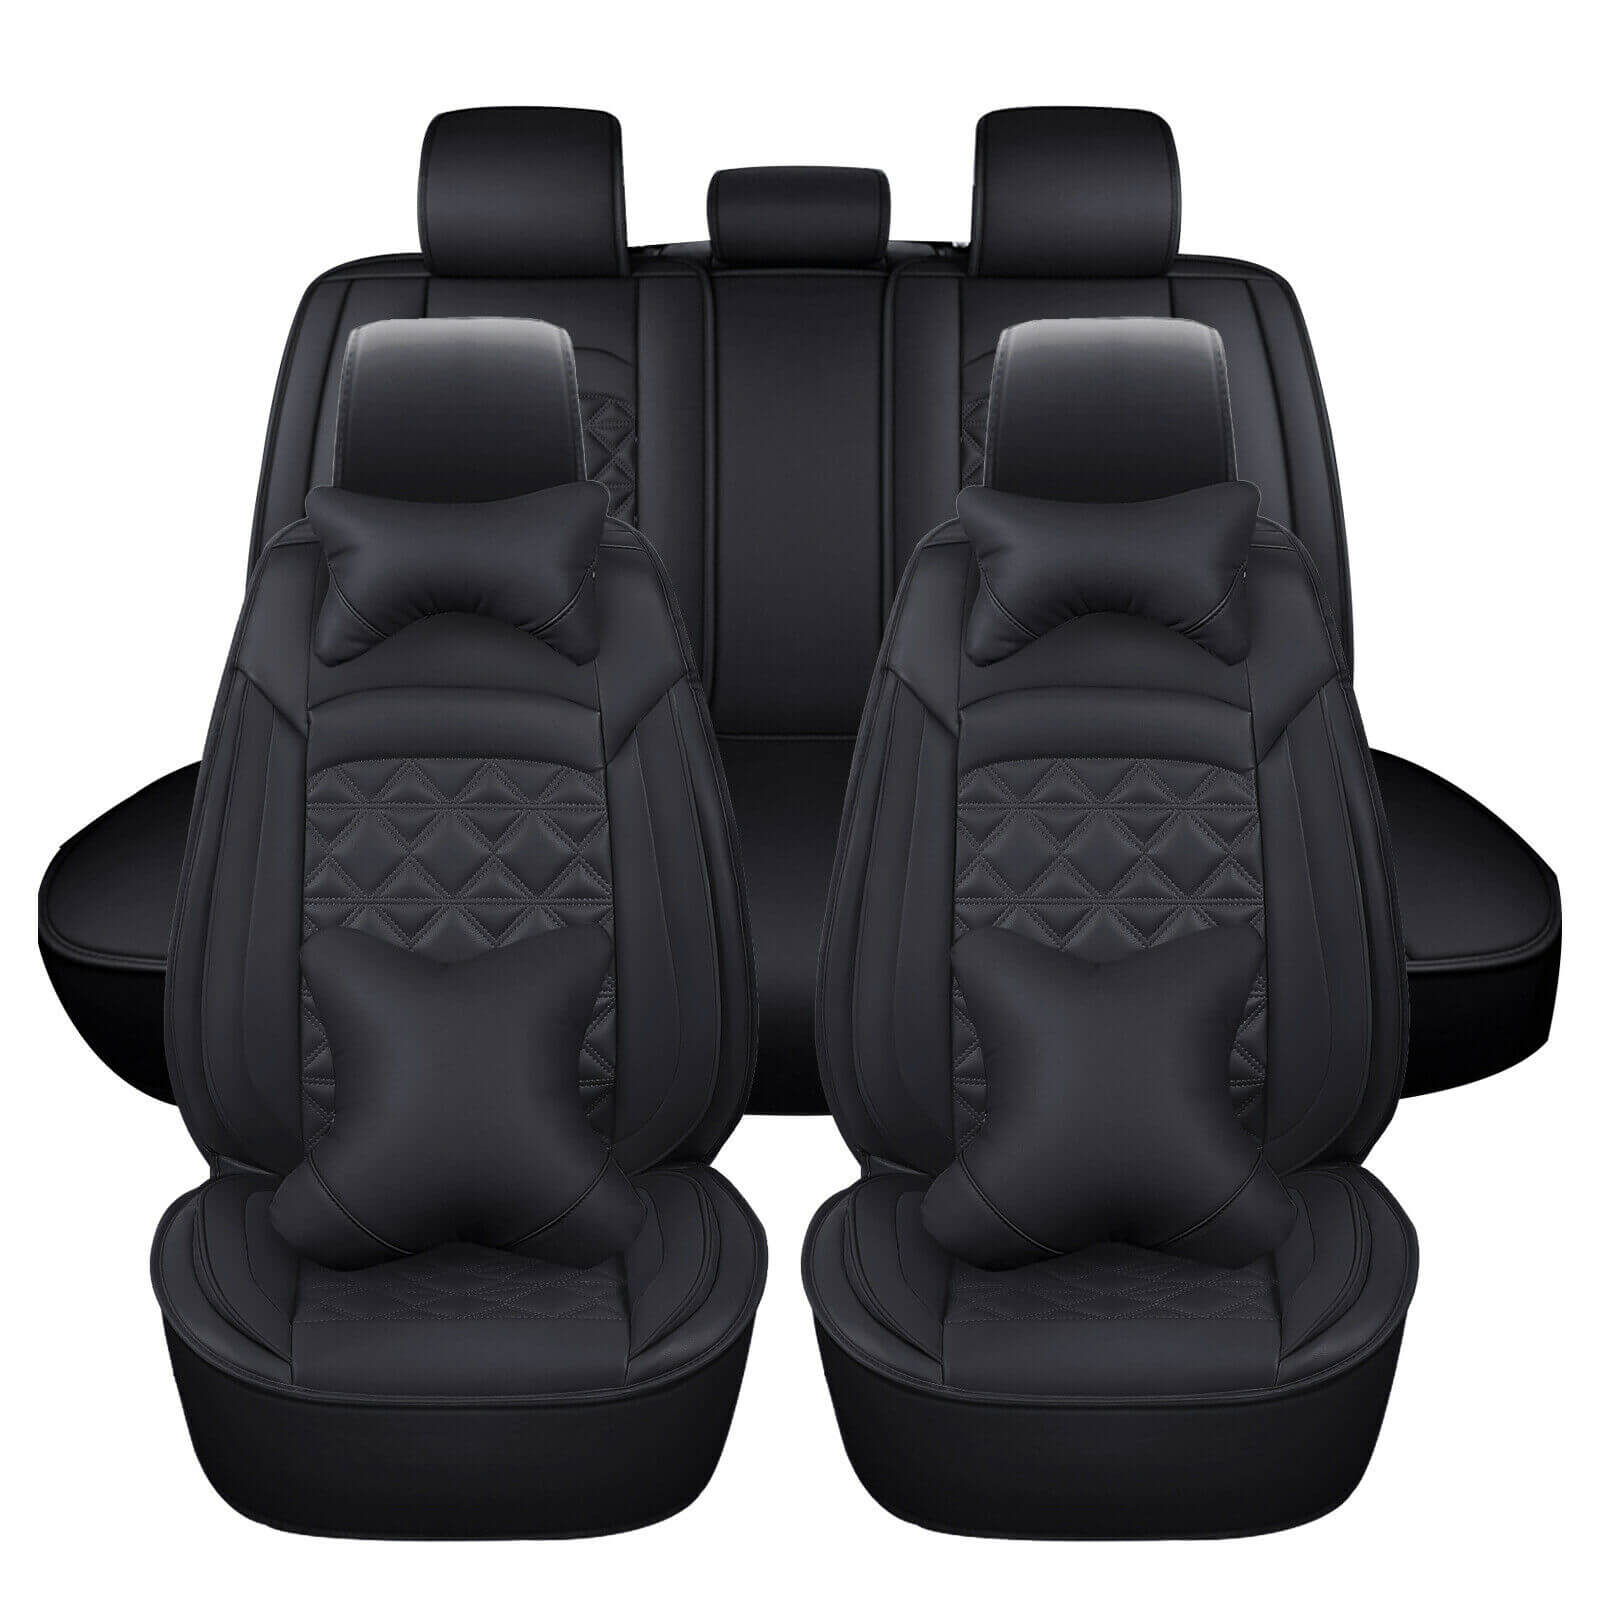 Black Universal Full Surrounded Leather Car Seat Covers